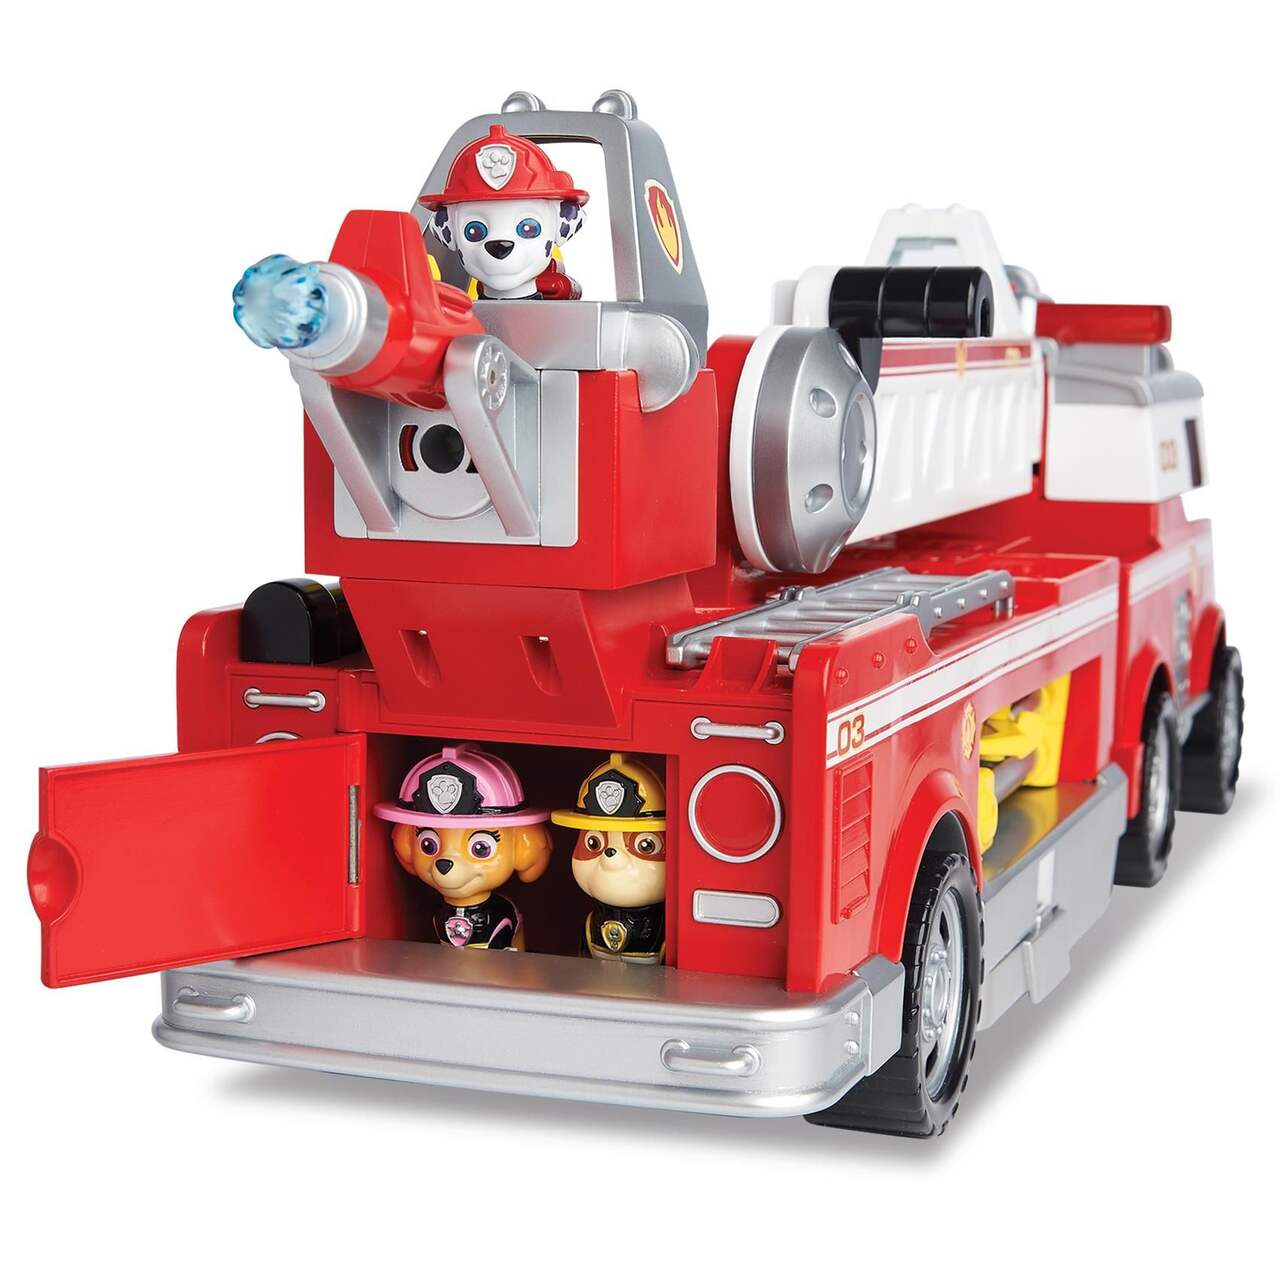 https://media-www.canadiantire.ca/product/seasonal-gardening/toys/preschool-toys-activities/0505351/paw-patrol-ultimate-fire-truck-d41c9f9a-784a-4df0-ba23-cbced0f7719b-jpgrendition.jpg?imdensity=1&imwidth=640&impolicy=mZoom